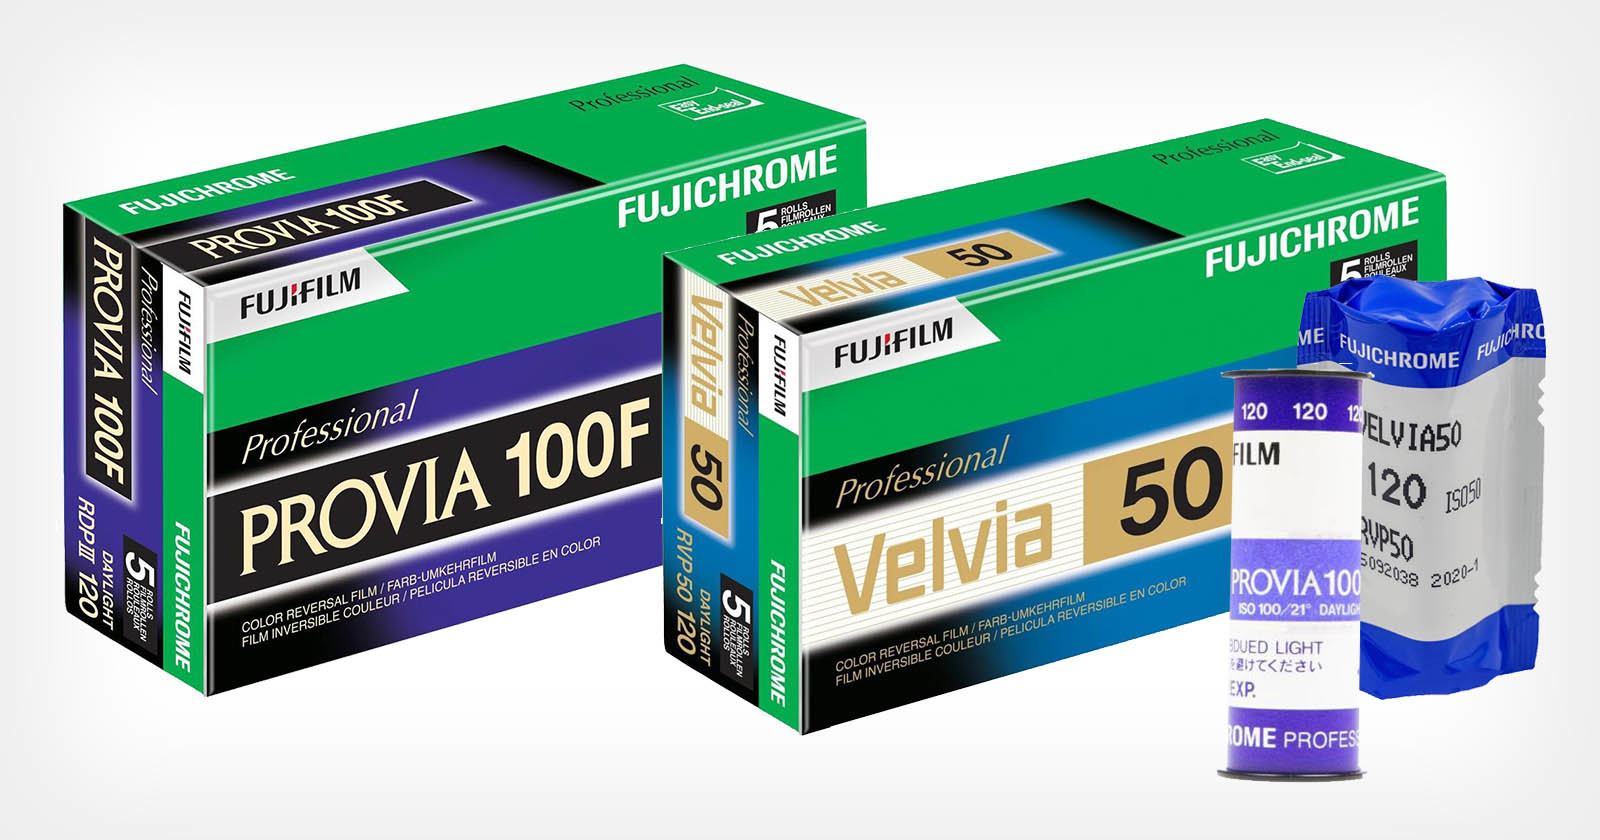 Fujifilm Japan Stops Accepting Orders for Color Film Amid Supply Issues